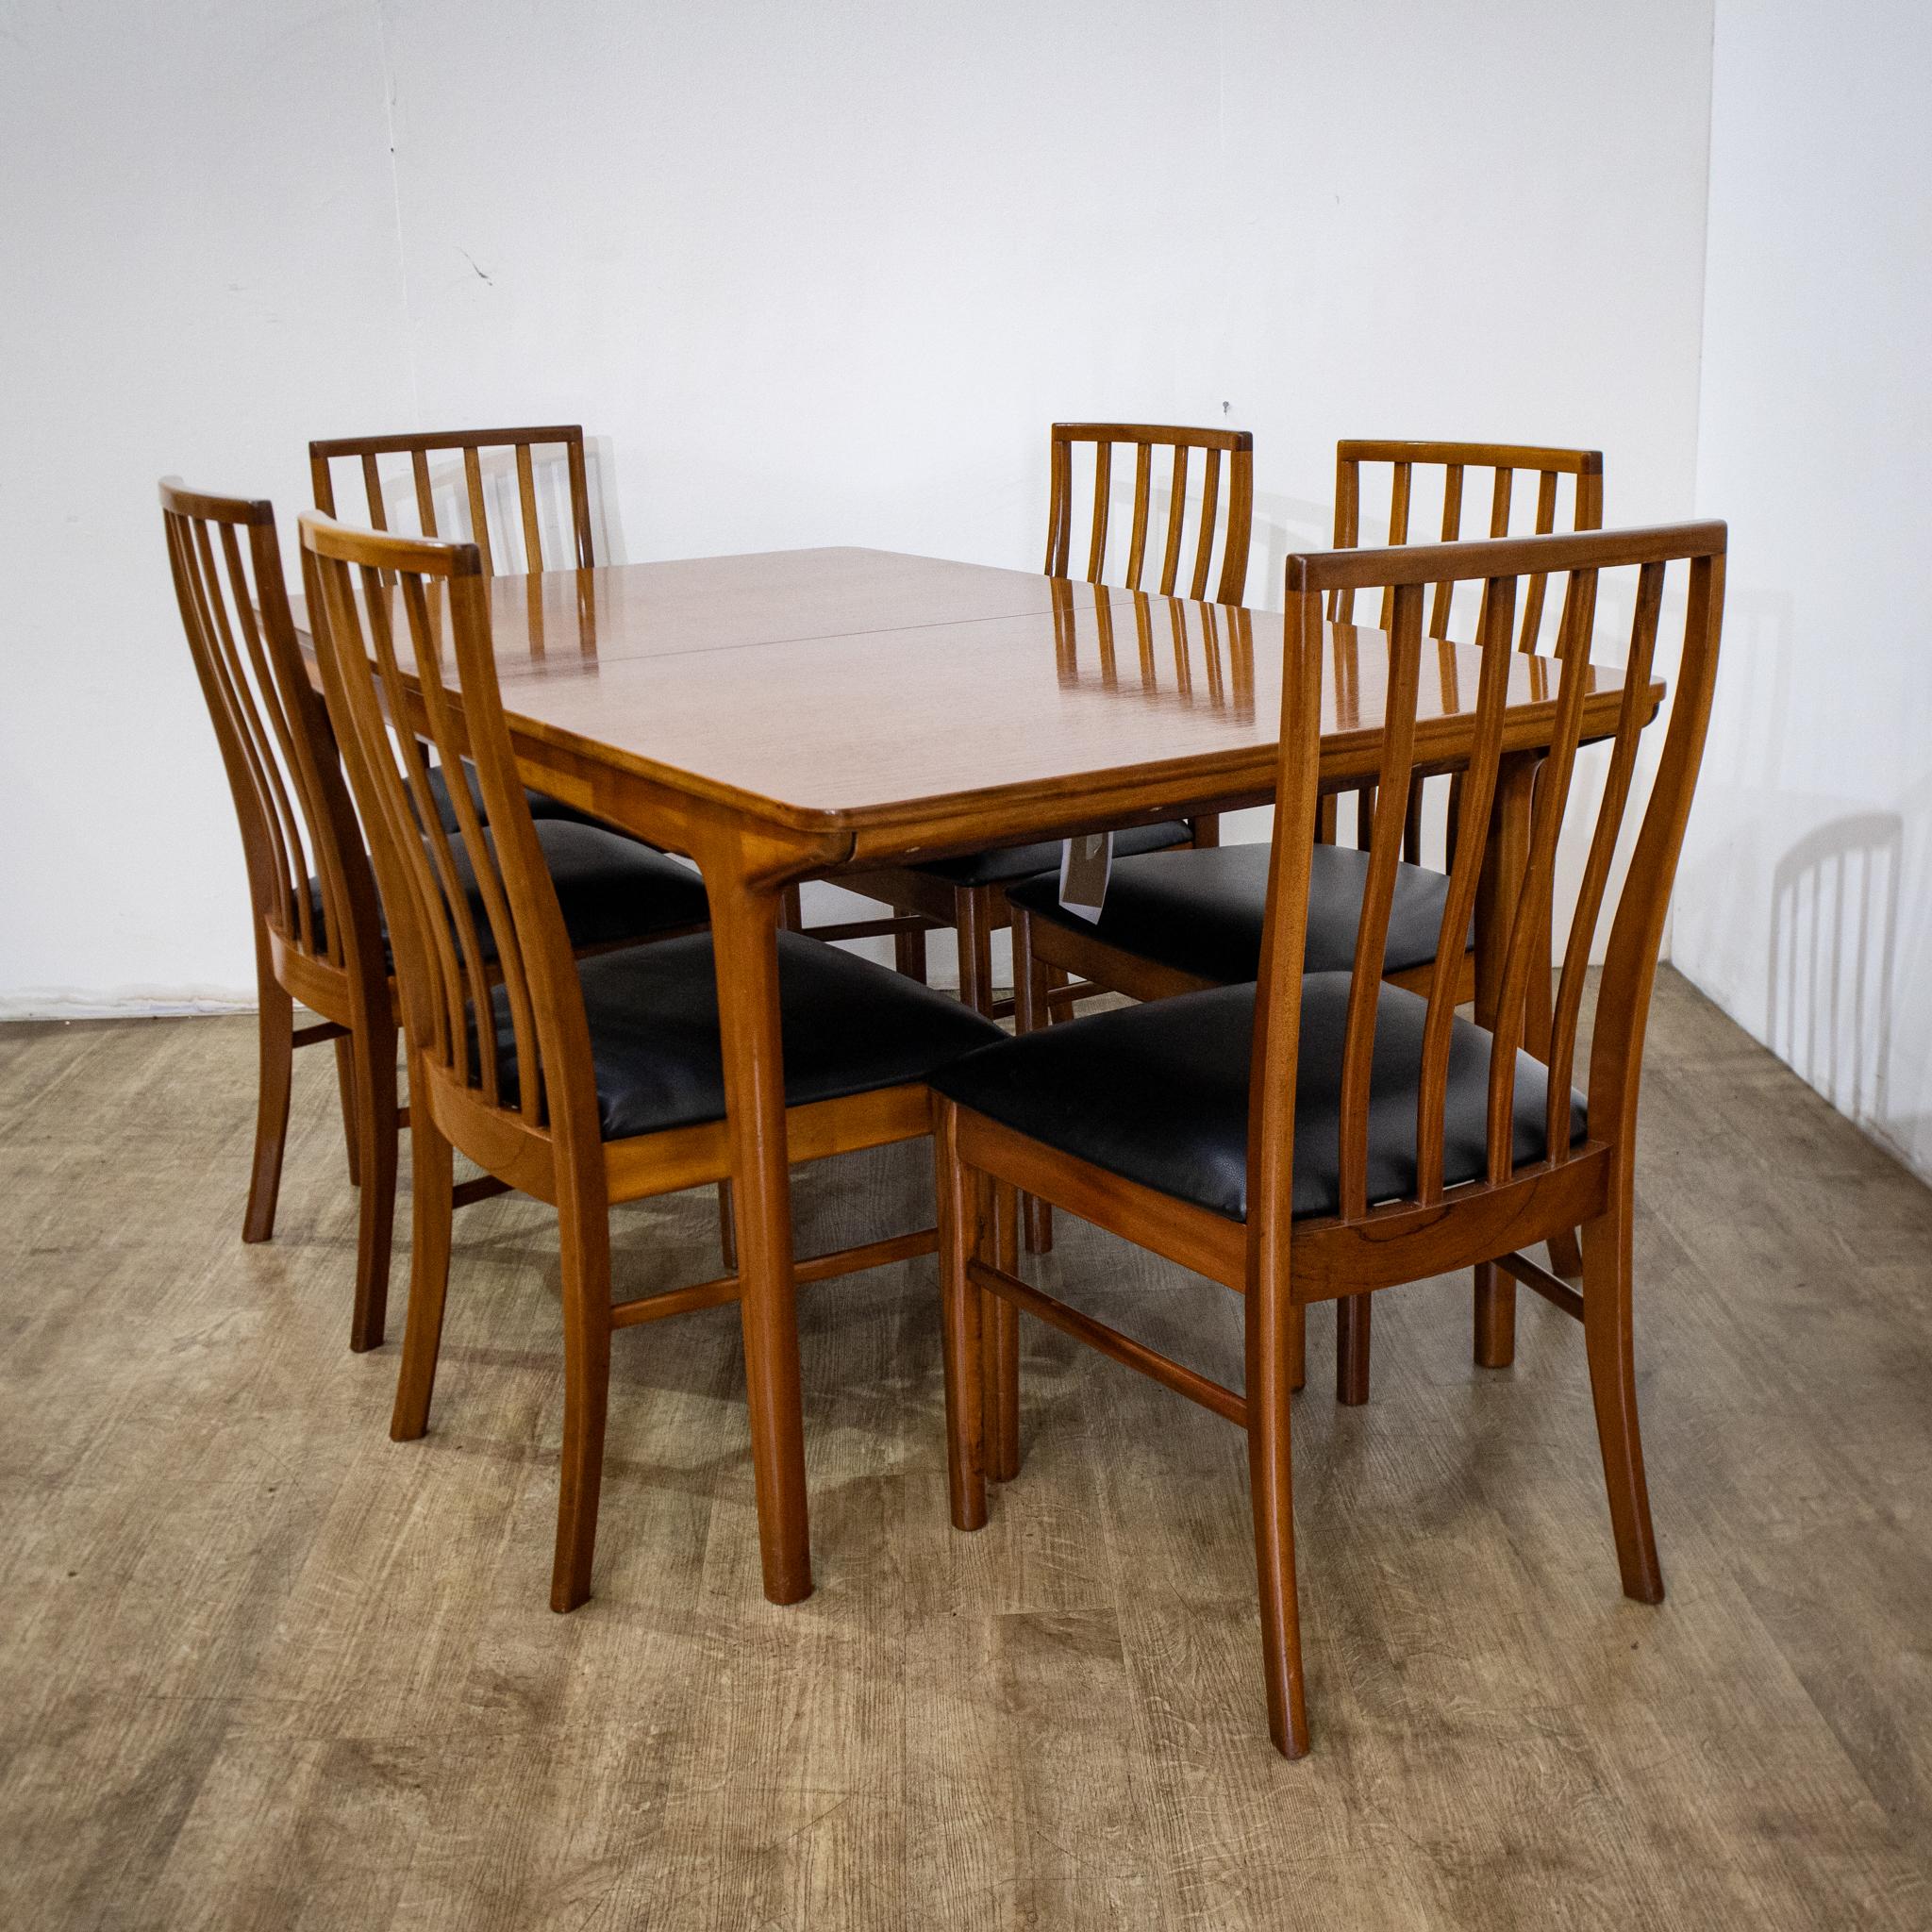 Stylish McIntosh extending dining table and matching set of 6 dining chairs with upholstered seats. Displaying timeless rich colours of the natural teak and classic mid-century modern dining chairs boasting an elegant form and black seat